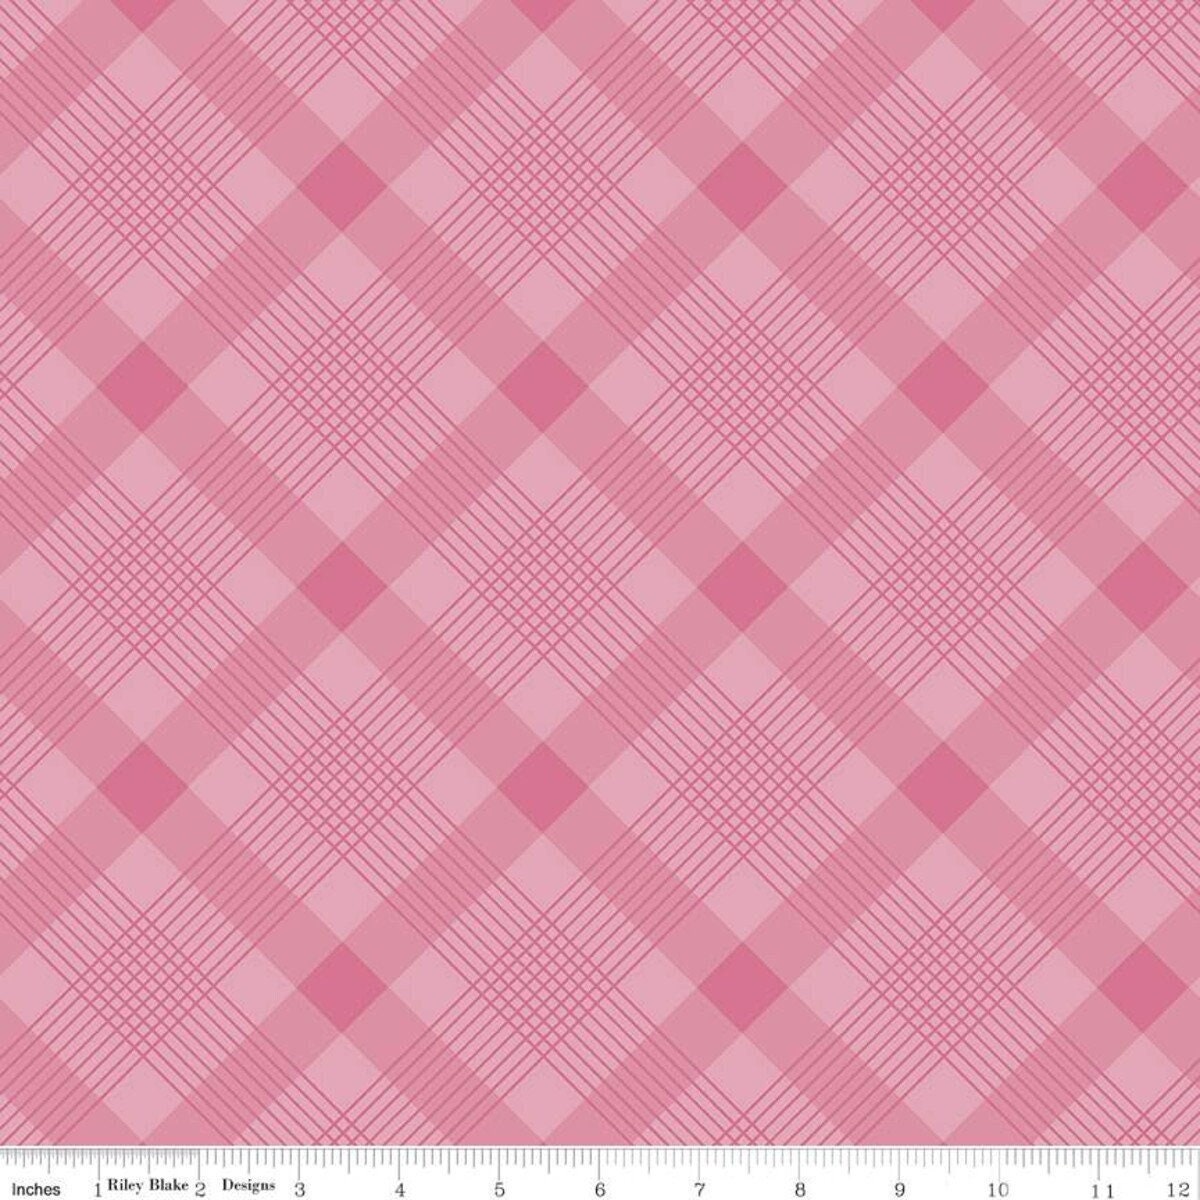 Falling In Love Plaid Pink by Dani Mogstad for Riley Blake Designs 